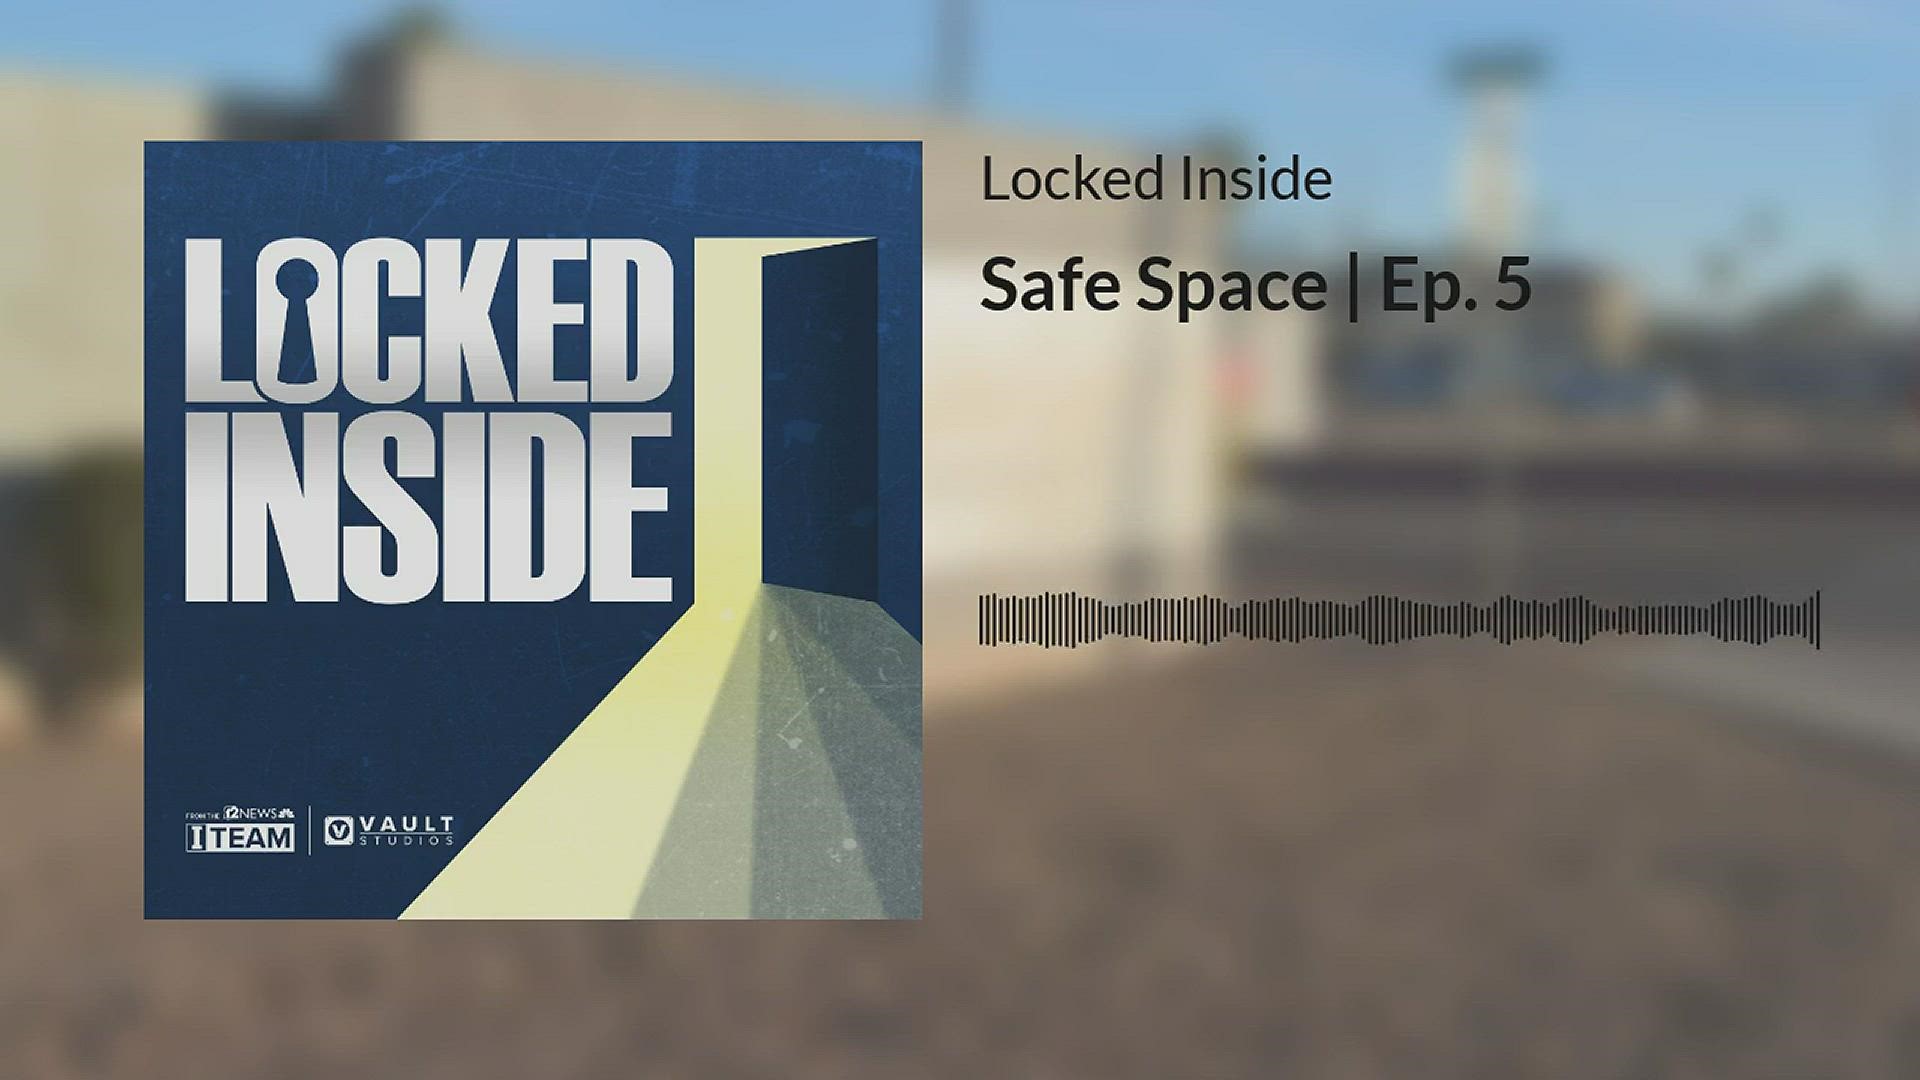 Nearly two dozen violations were found at a Gilbert group home after a killing last April. Why weren’t they found before? Hear more on this episode of Locked Inside.